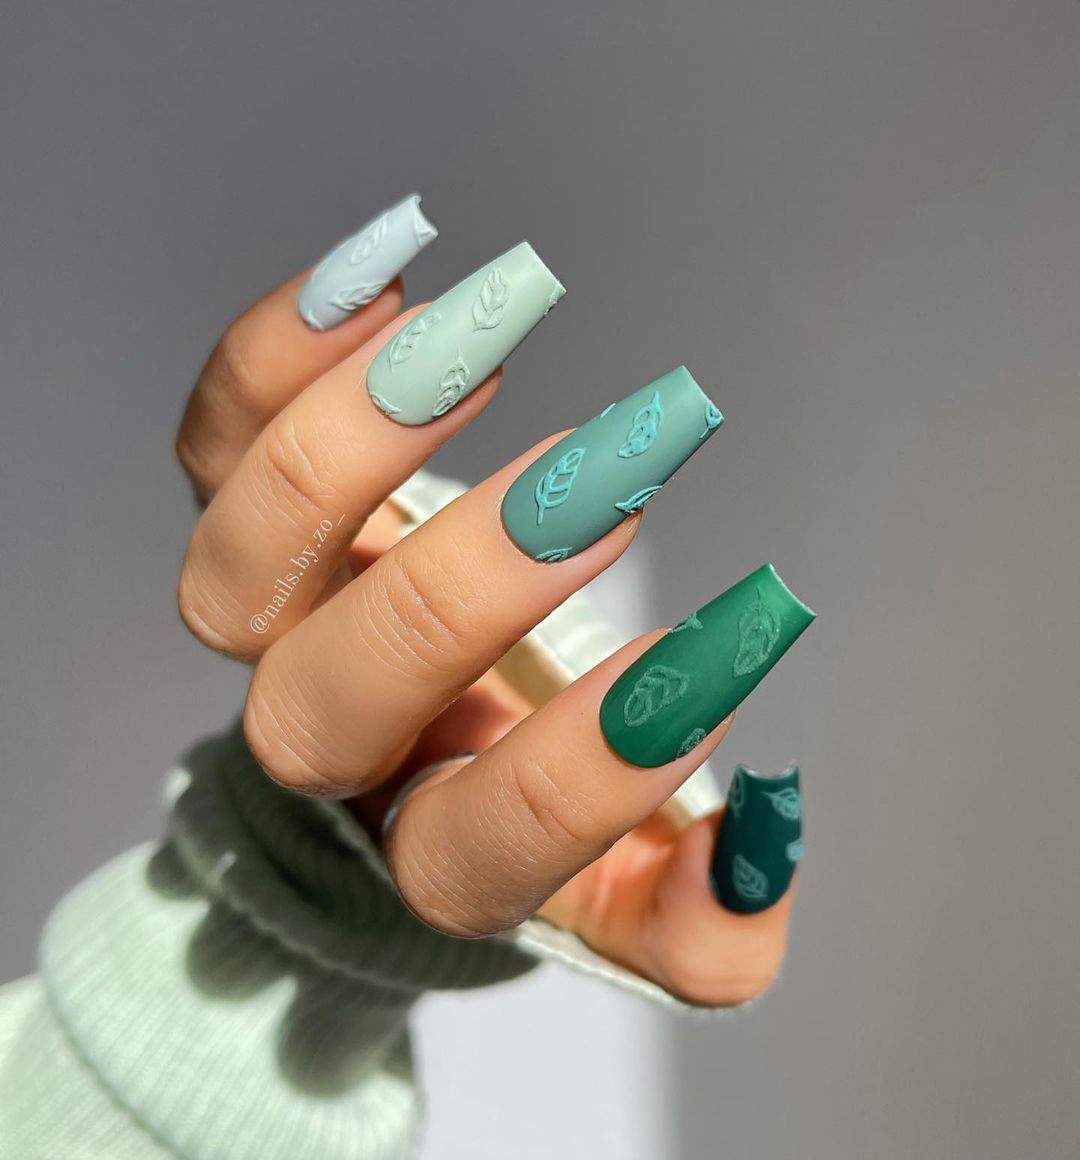 The 100+ Best Nail Designs Trends And Ideas In 2021 images 74